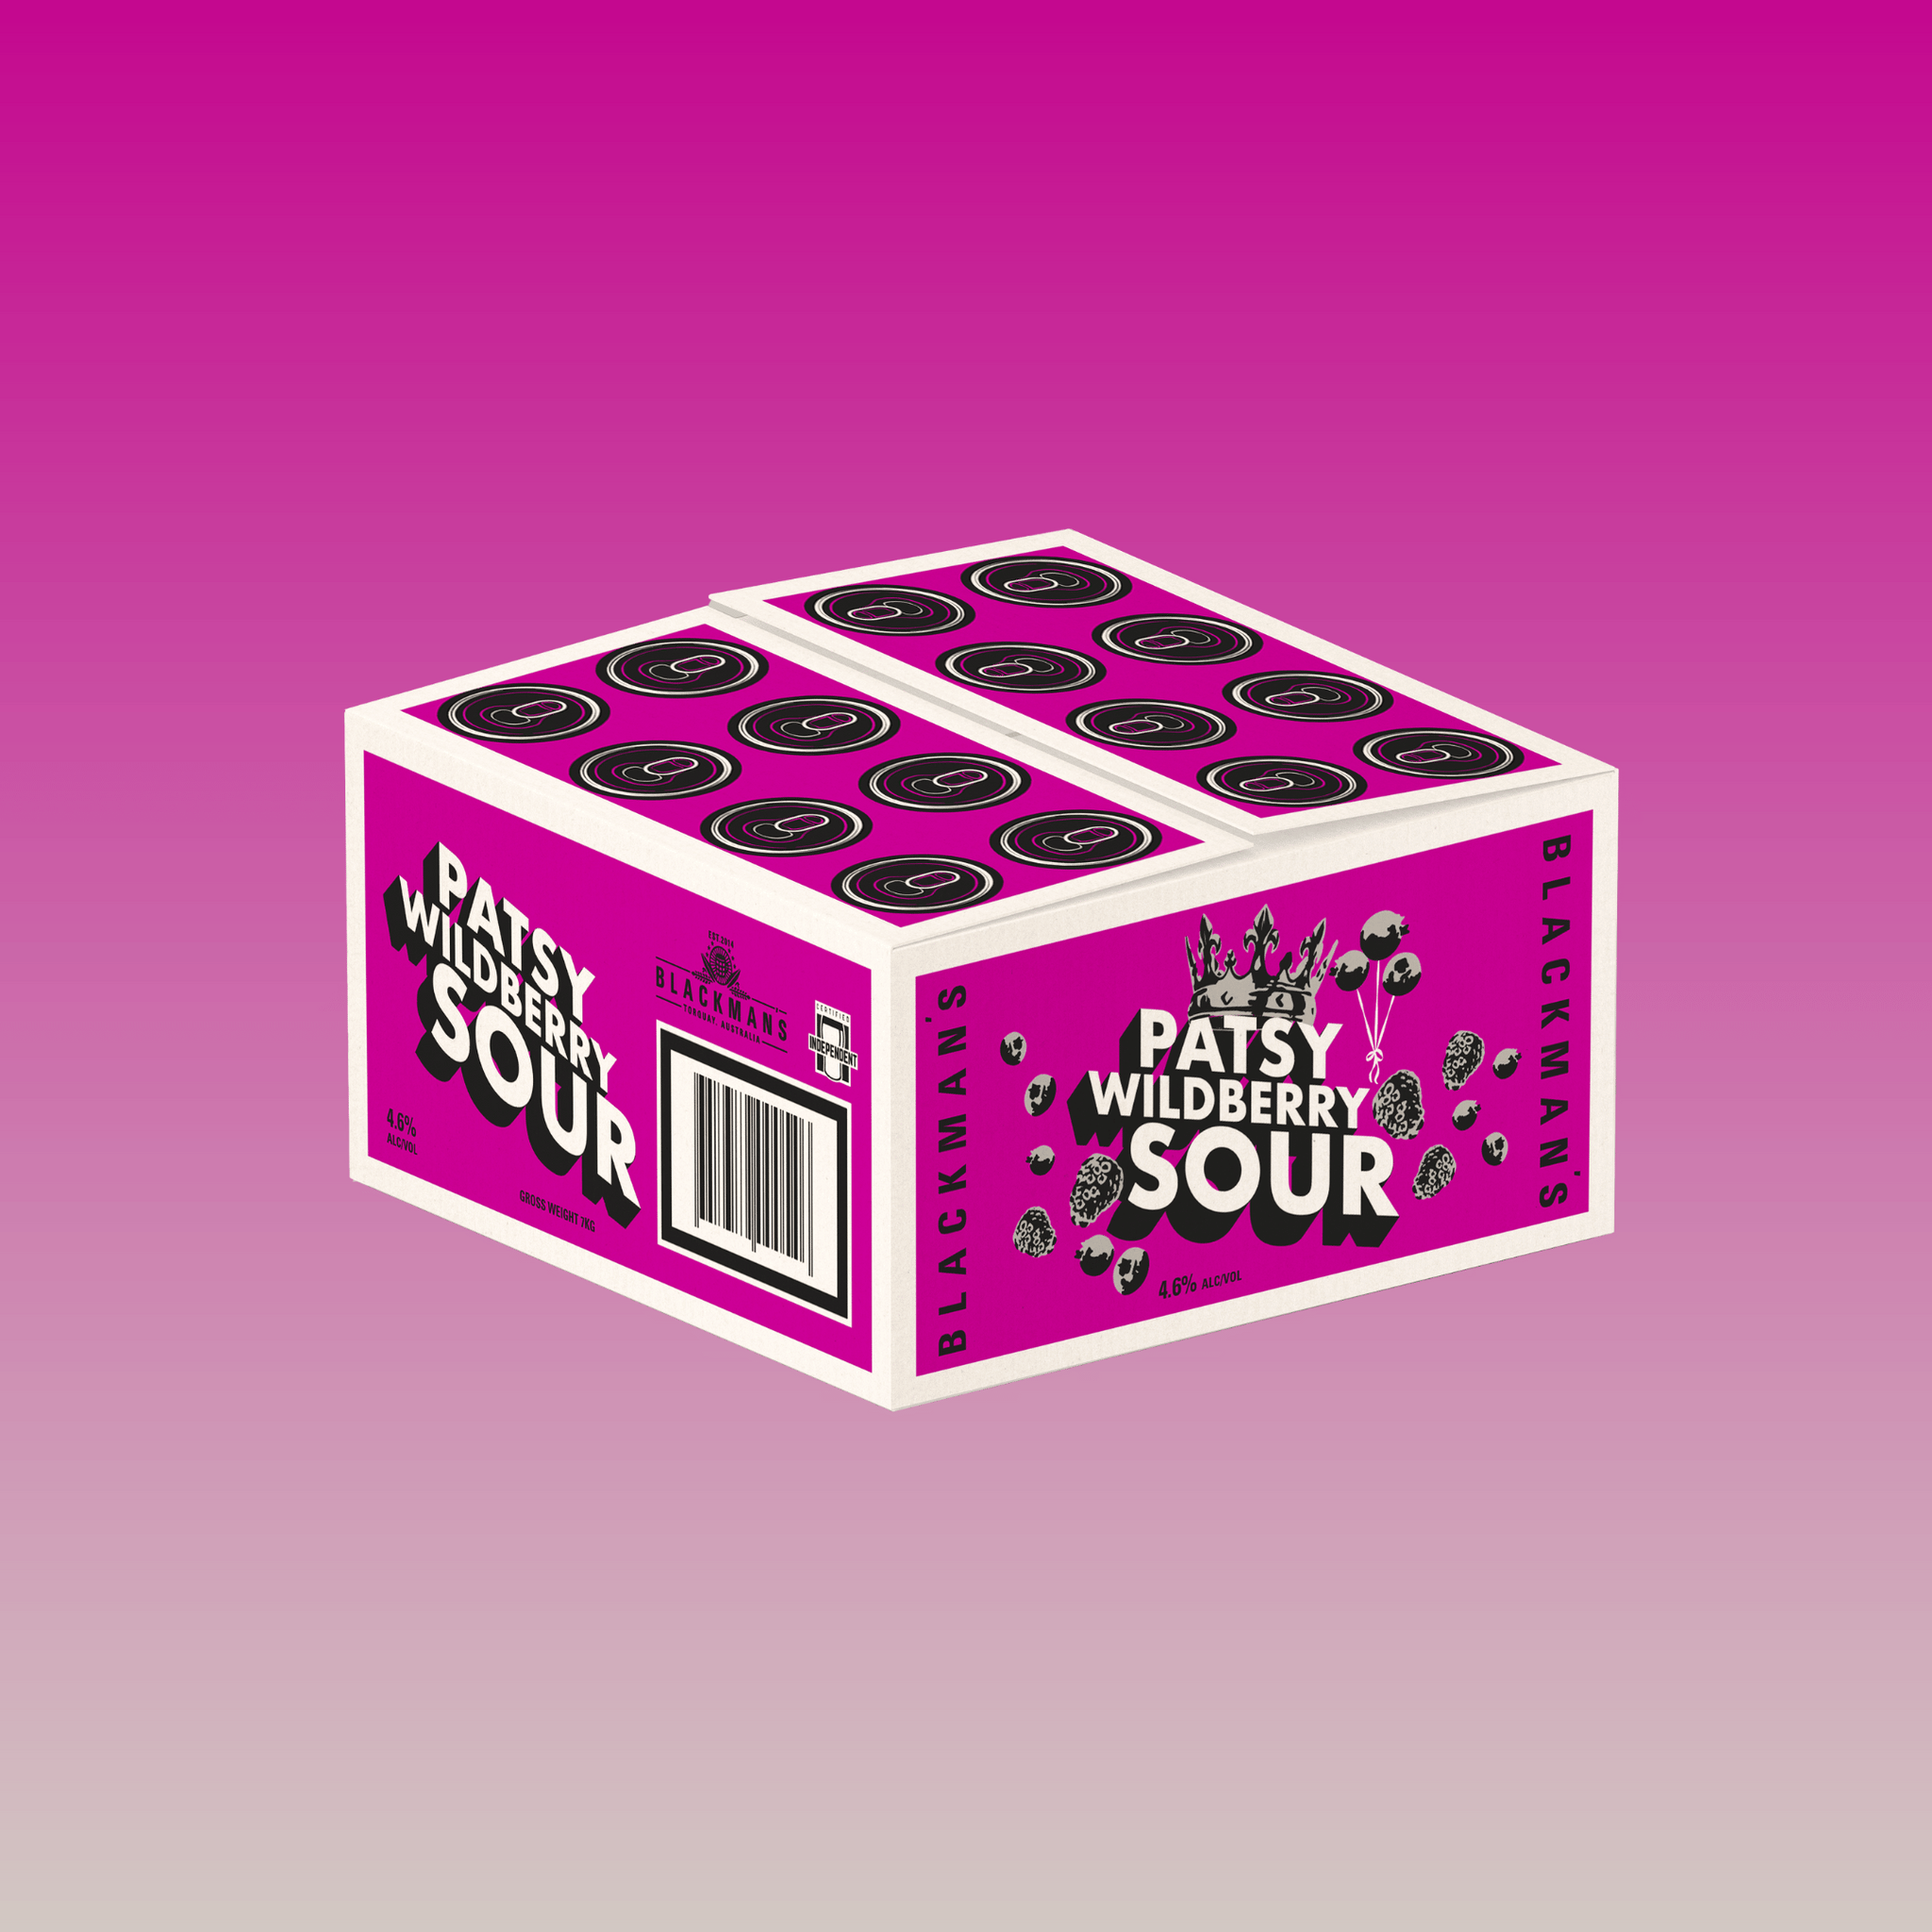 PATSY WILDBERRY SOUR